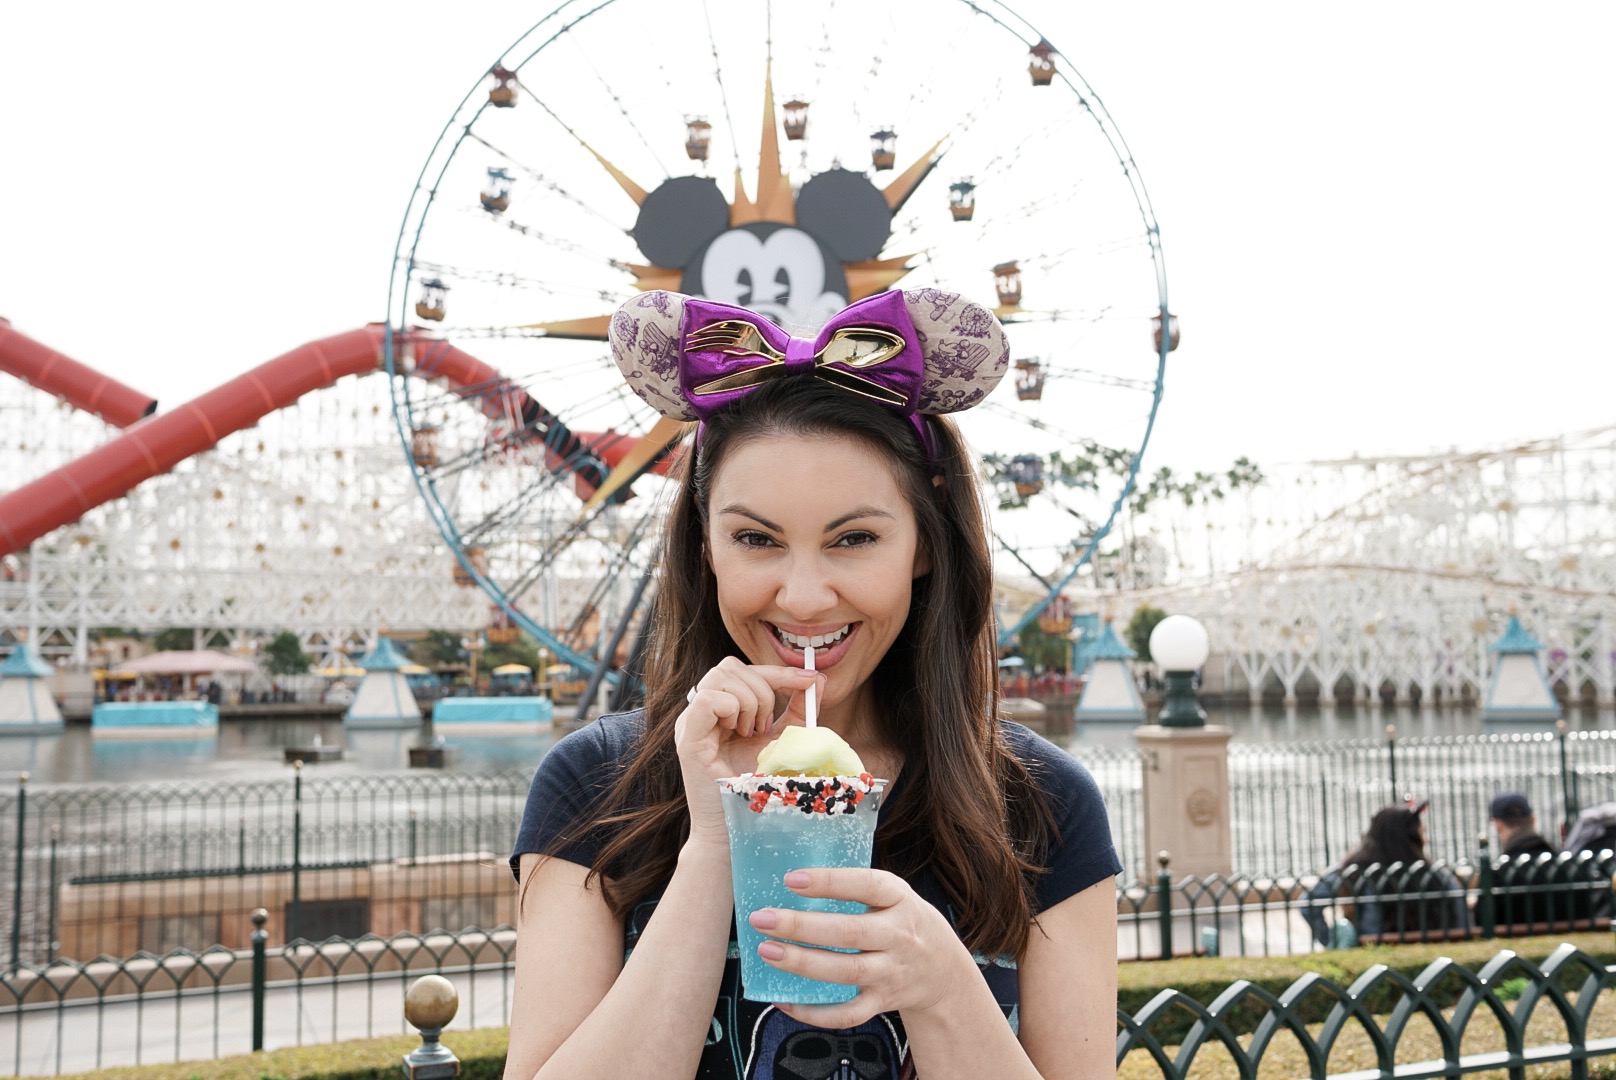 AAA Disneyland Tickets Are Back! Here’s How You Can Save BIG.